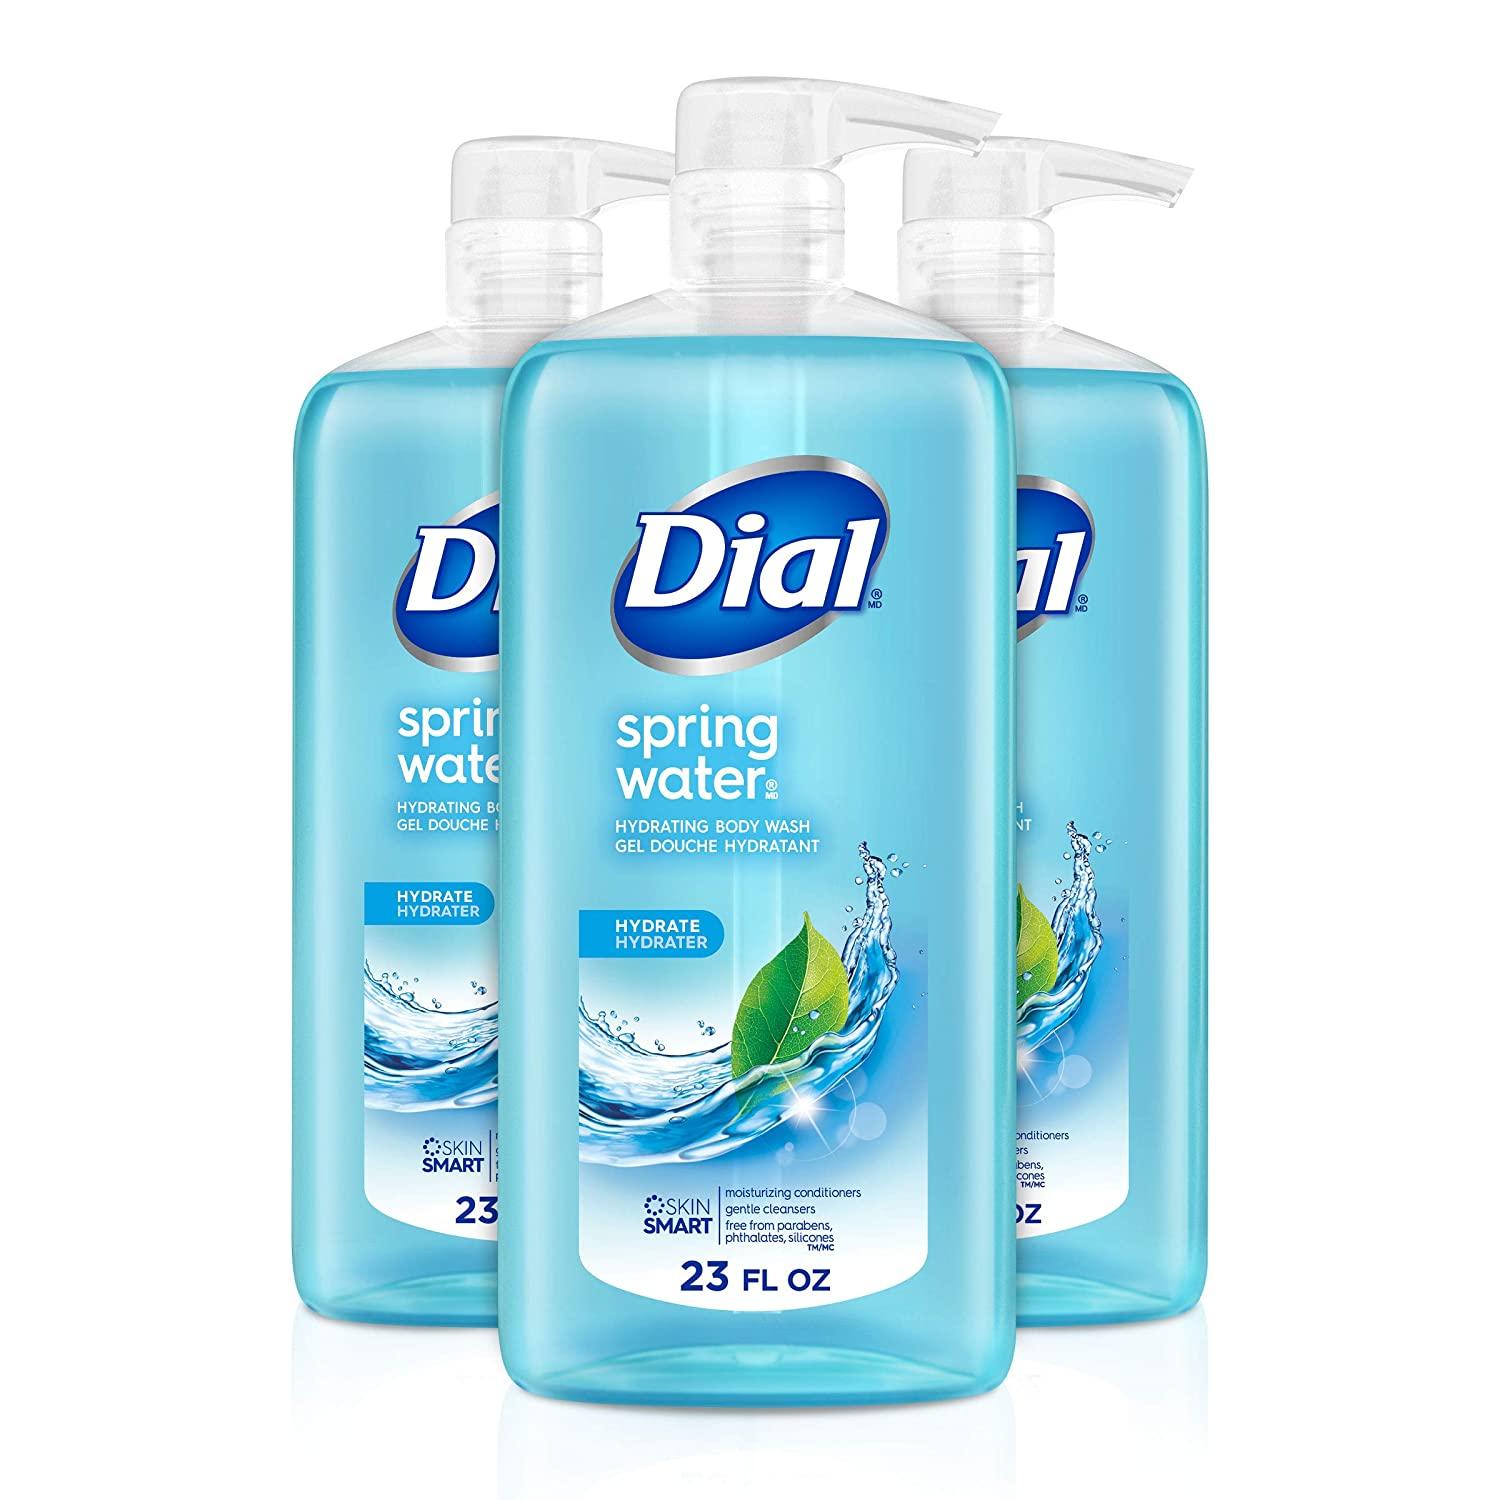 3 Dial Spring Water Body Wash for $5.20 Shipped